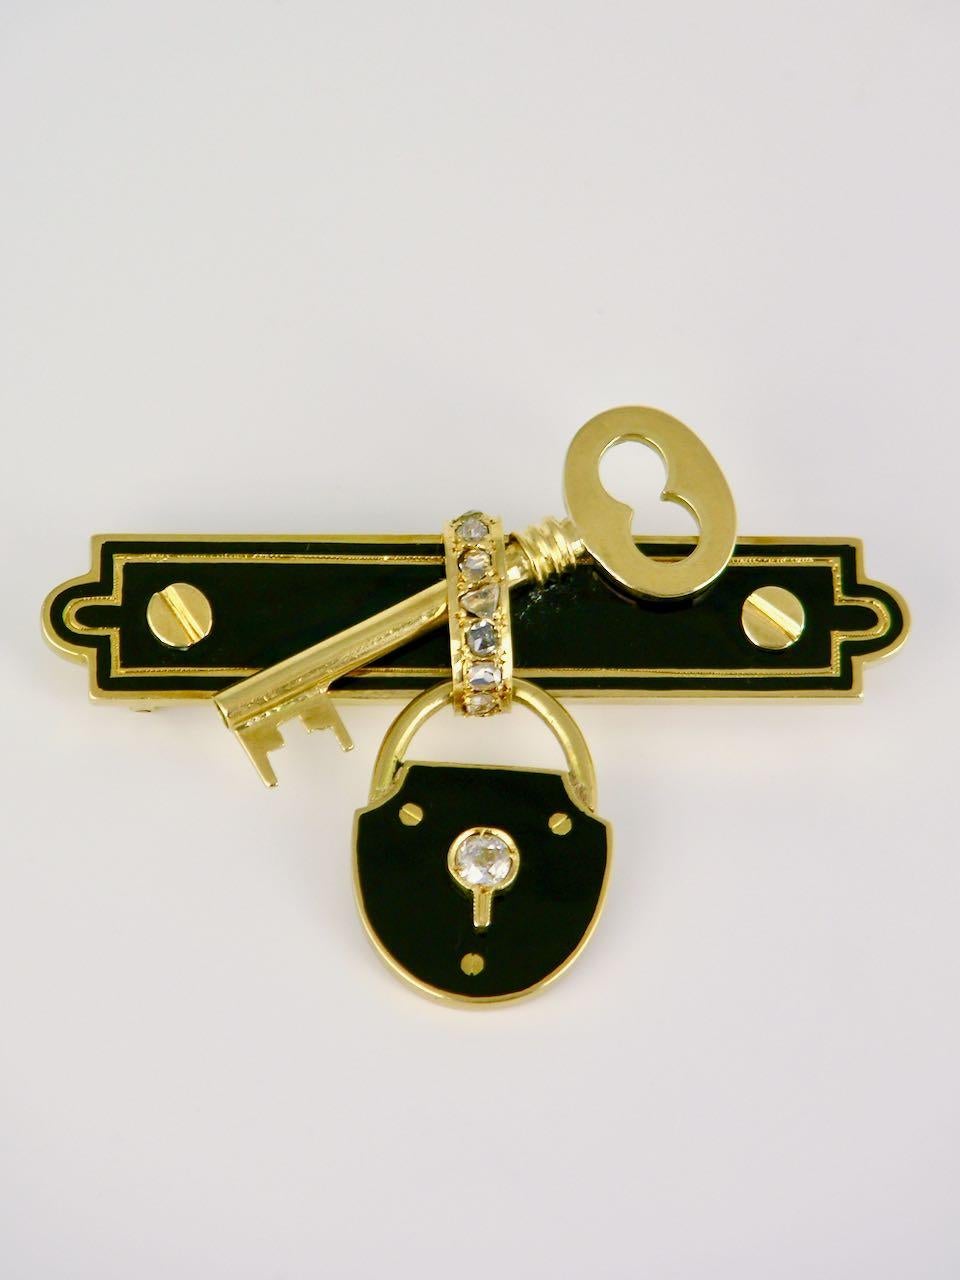 A 15k yellow gold black enamel diamond lock and key brooch - a late 19th century pin of a unique design of a padlock decorated in black enamel with an old cut diamond set within the key hole and suspended below a black enamel bar brooch with screw